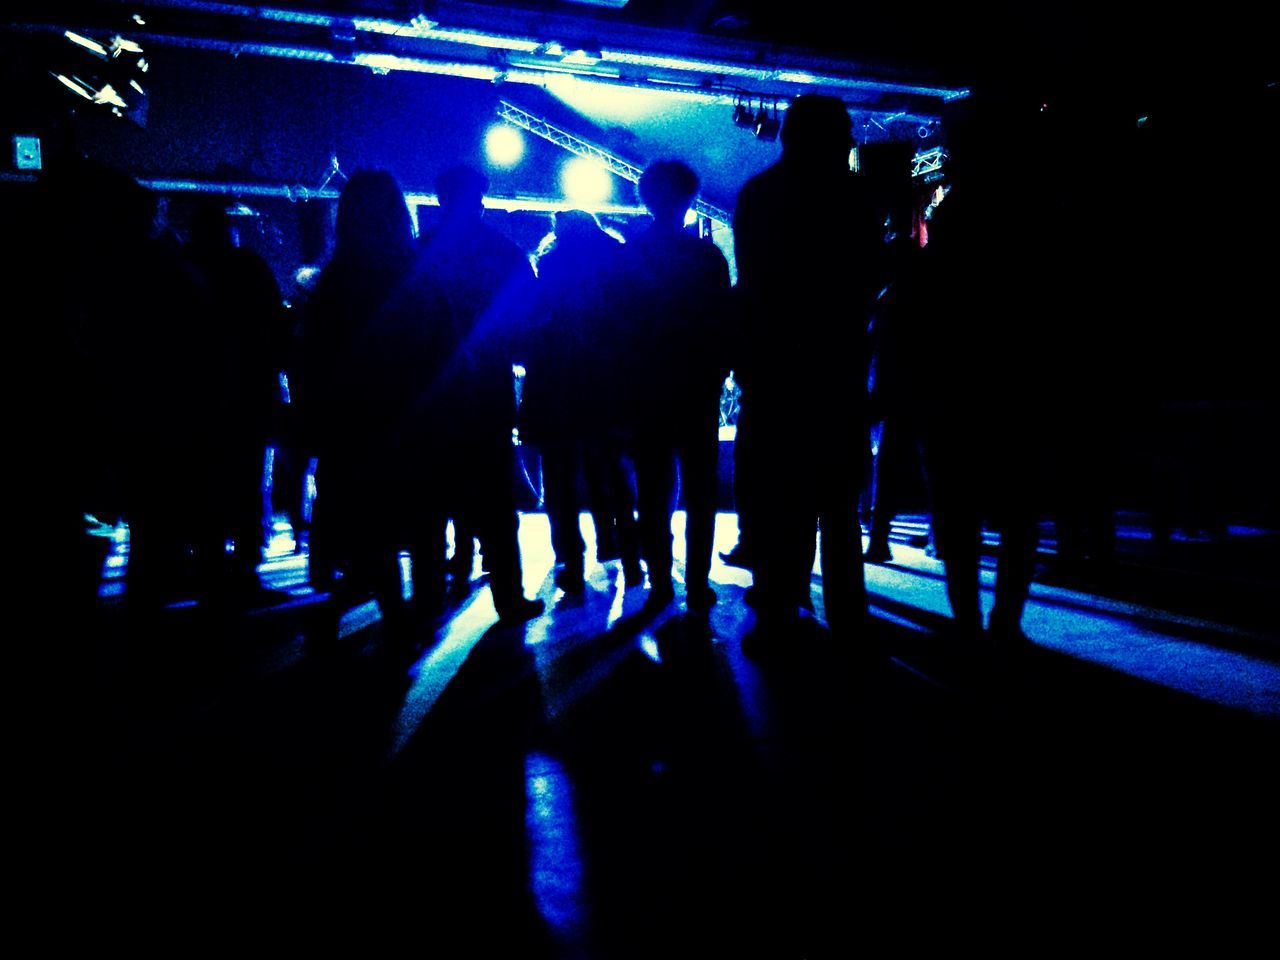 men, night, lifestyles, indoors, illuminated, person, leisure activity, large group of people, arts culture and entertainment, rear view, standing, music, group of people, togetherness, medium group of people, dark, blue, crowd, silhouette